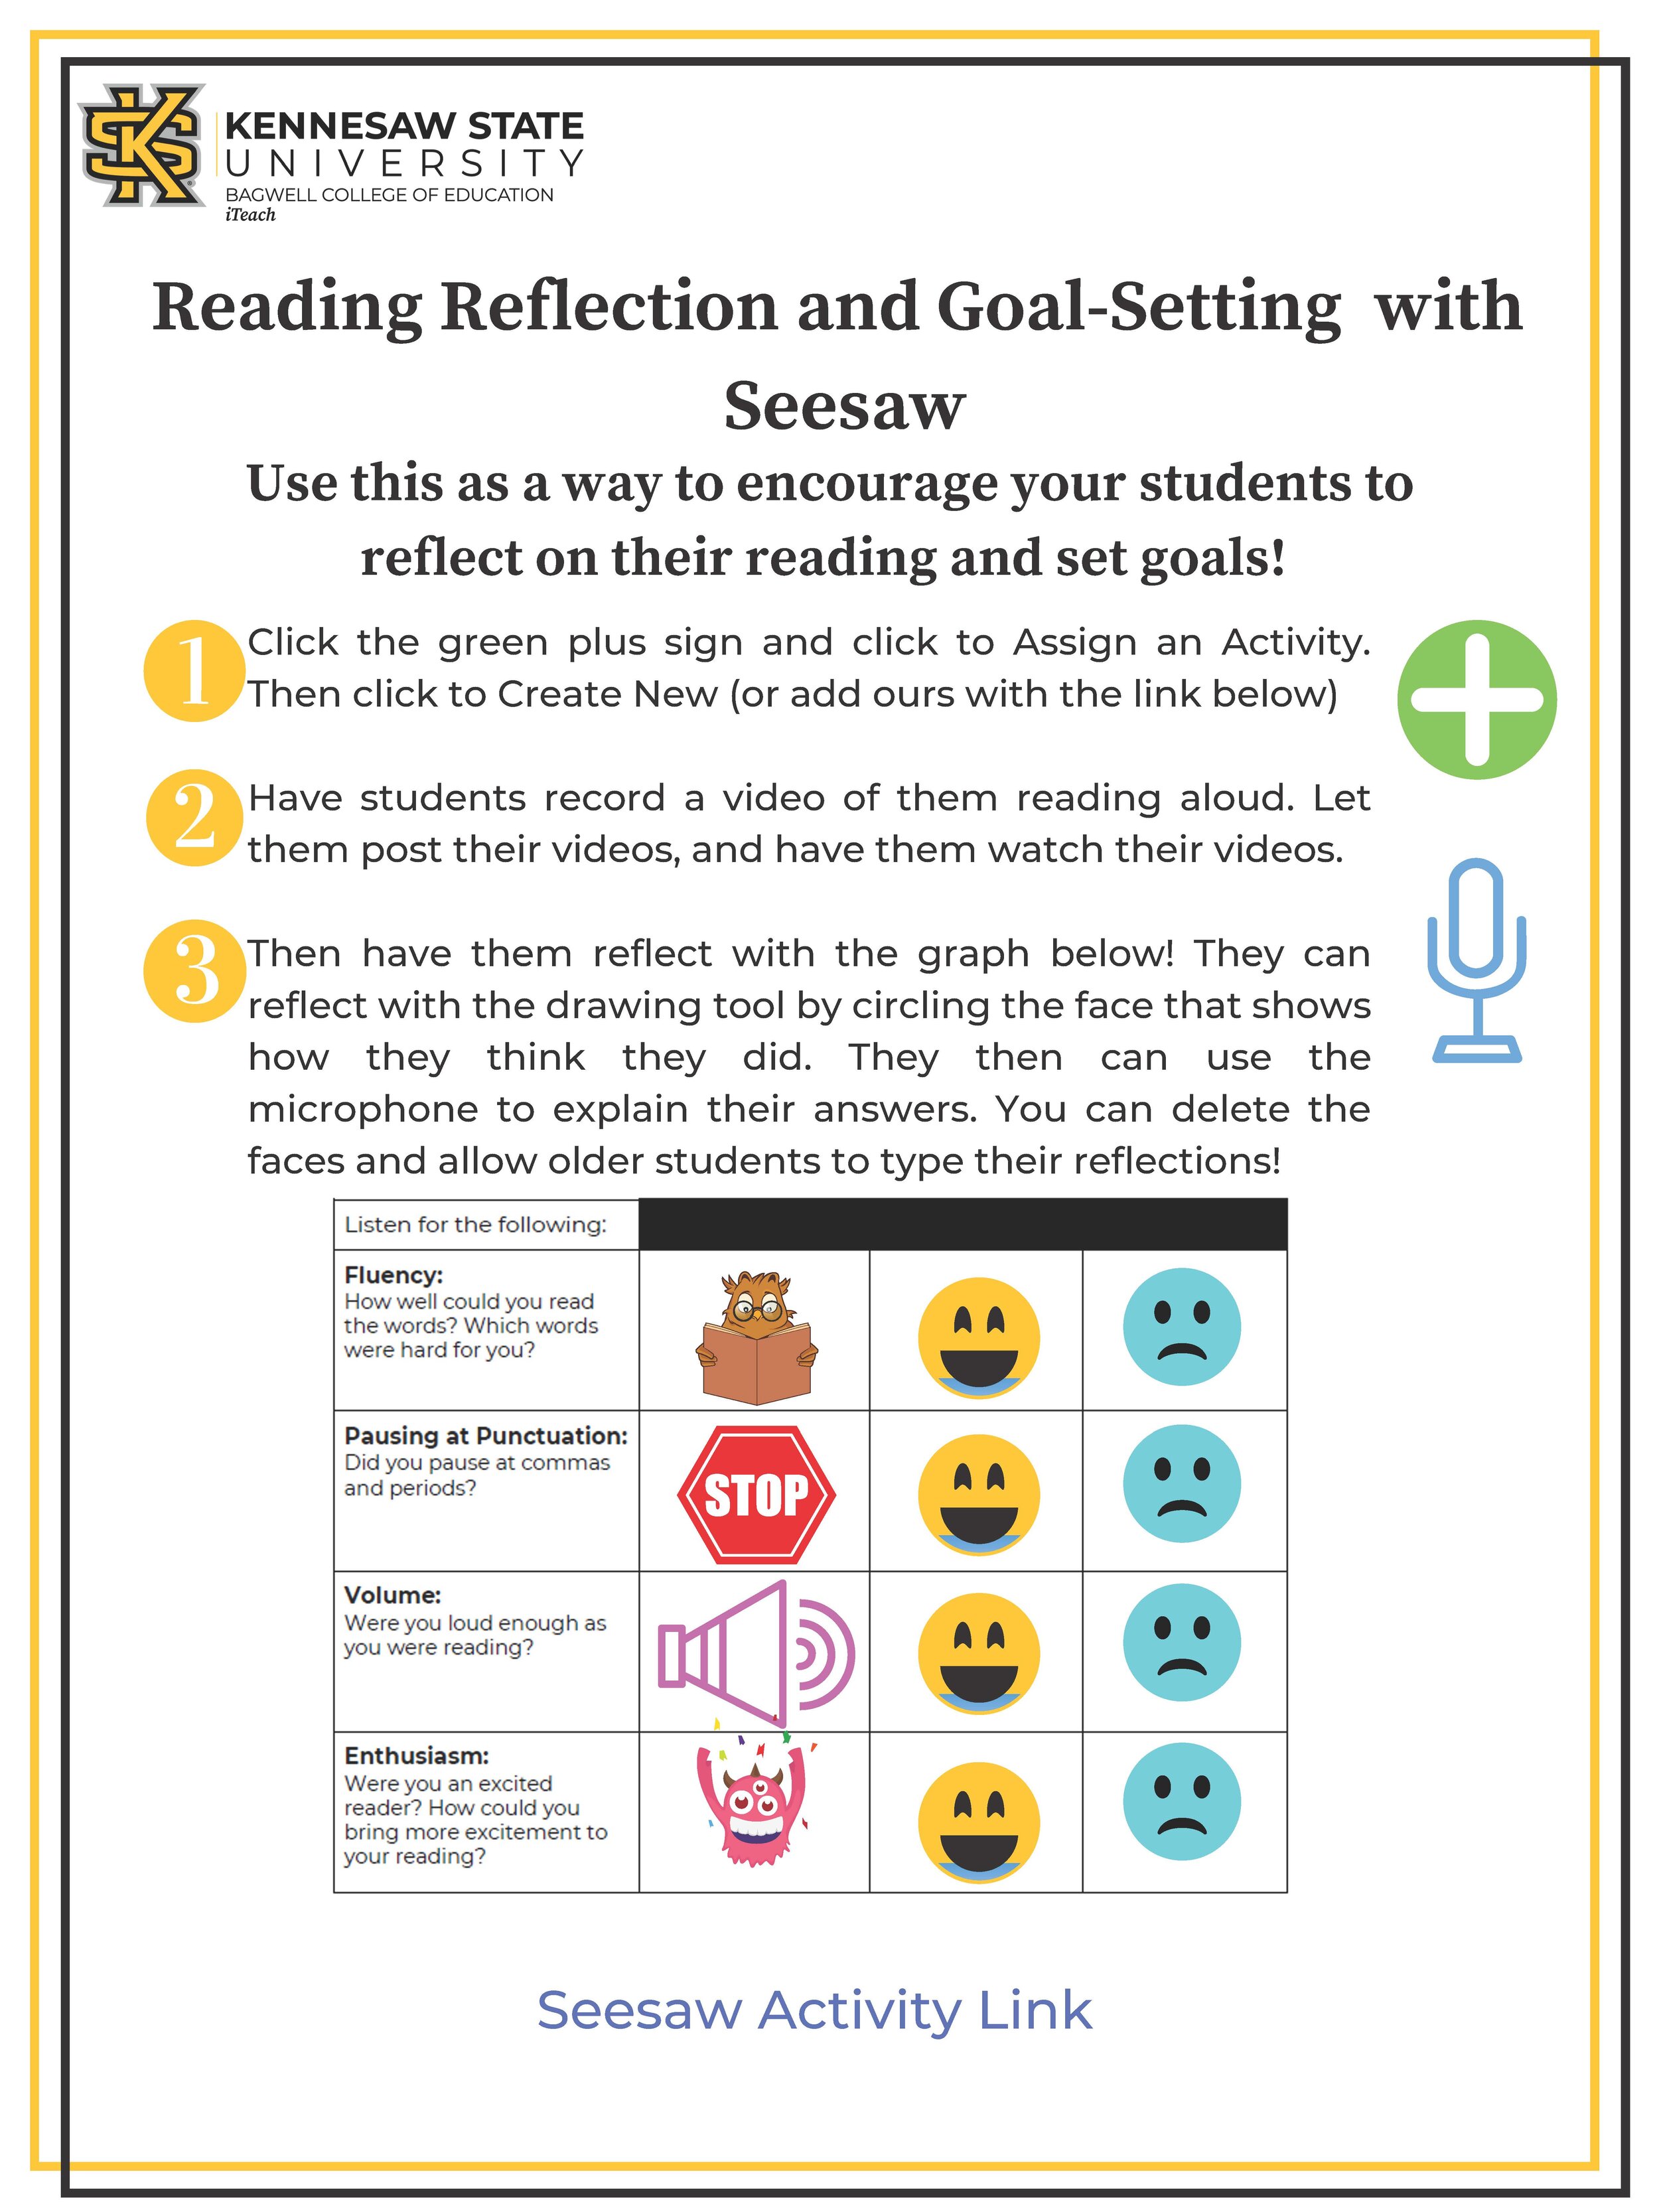 Seesaw for Reading Reflection and Goal-Setting 2+.jpg